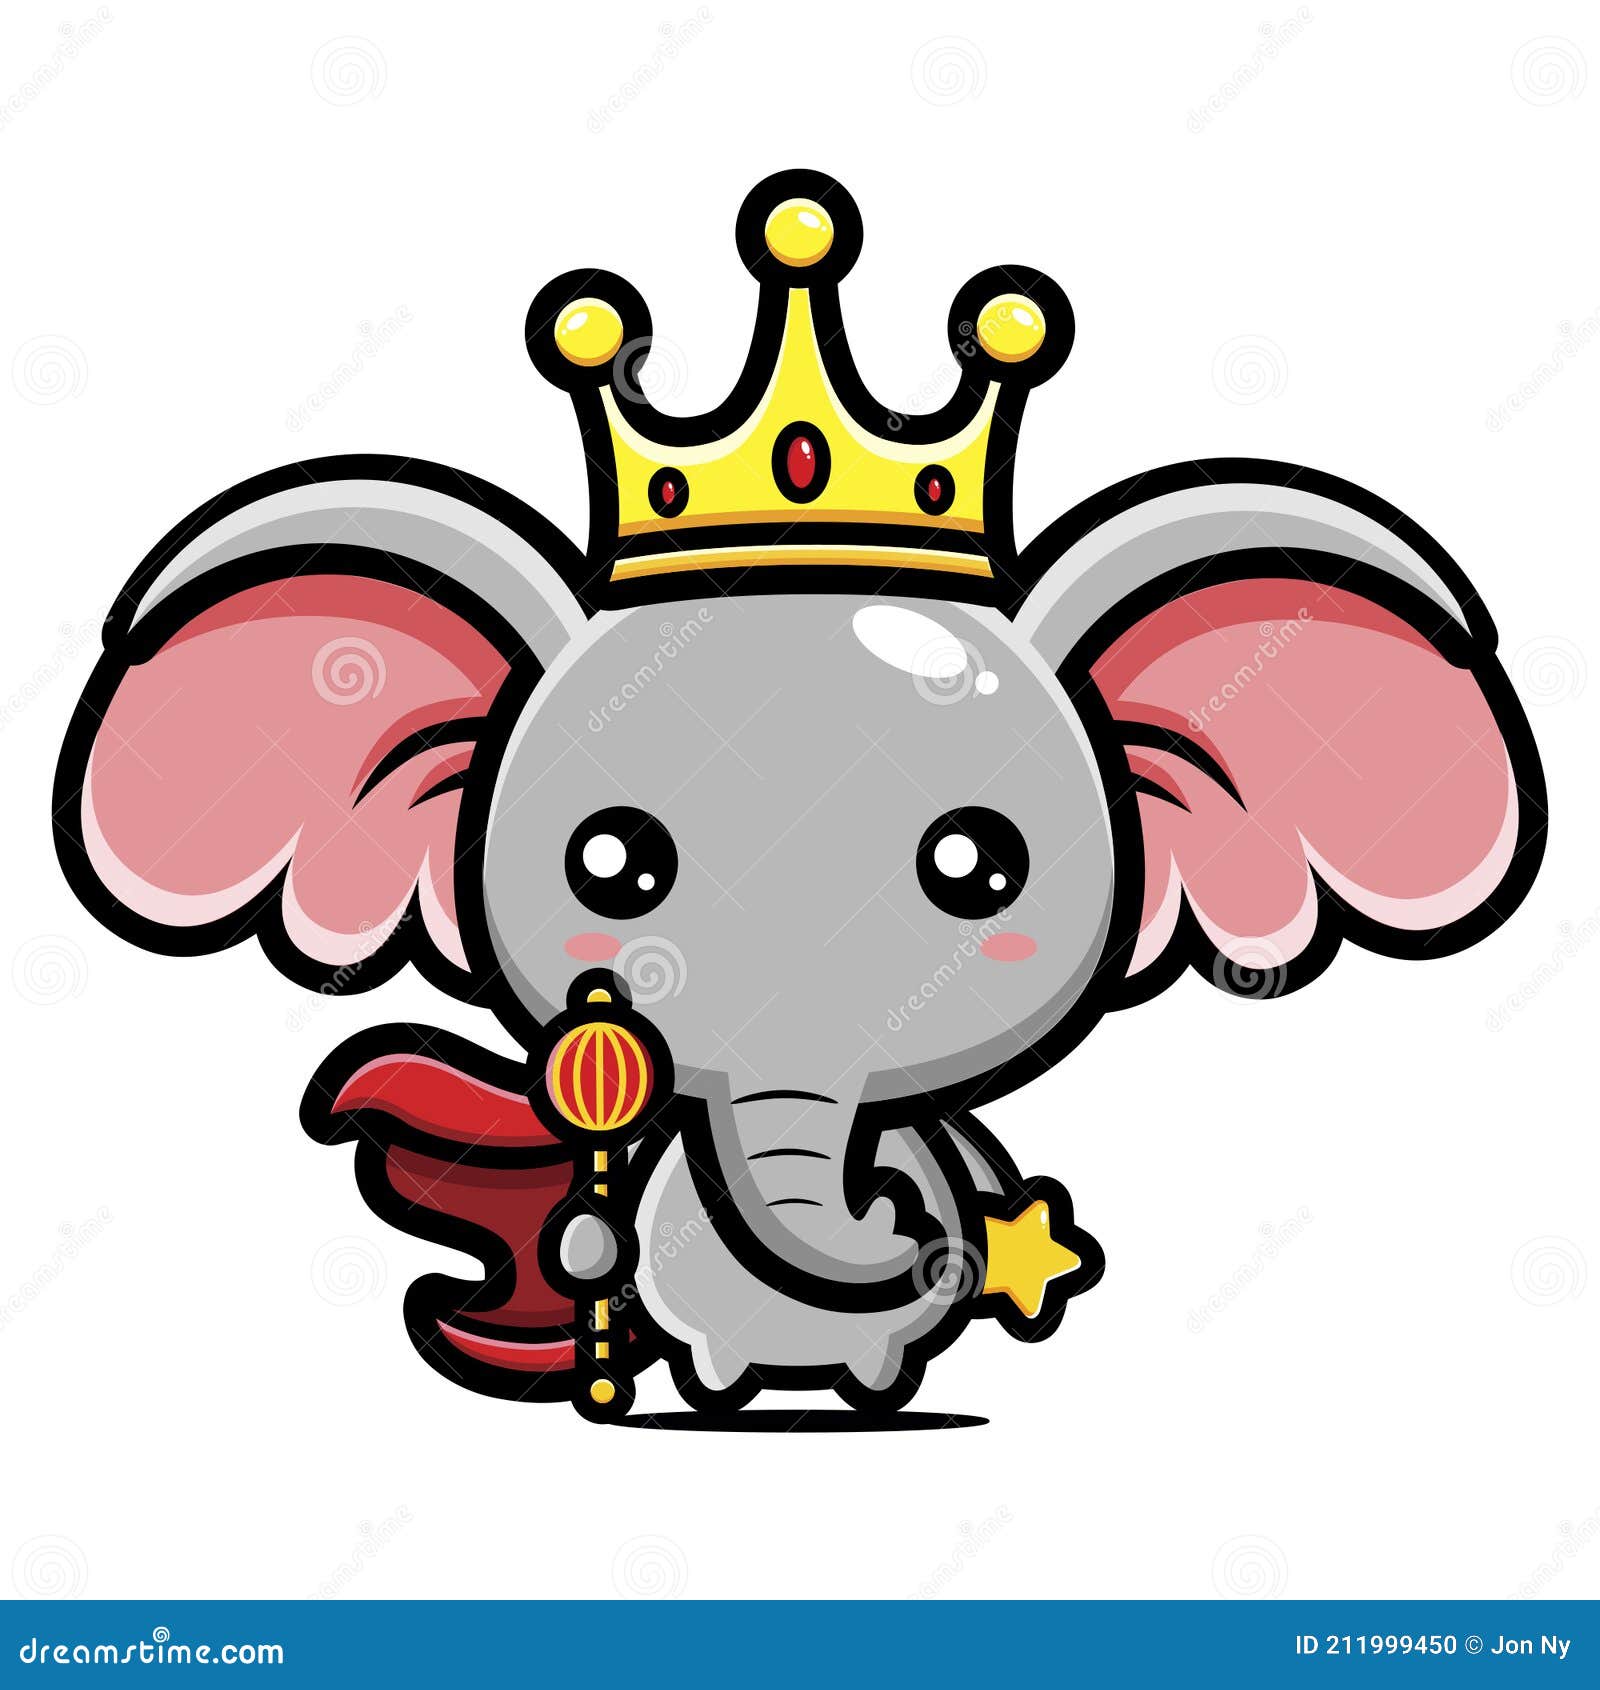 Cute Elephant Animal Cartoon Characters Become a King Wearing a Crown and a  Stick Stock Vector - Illustration of graphic, fauna: 211999450